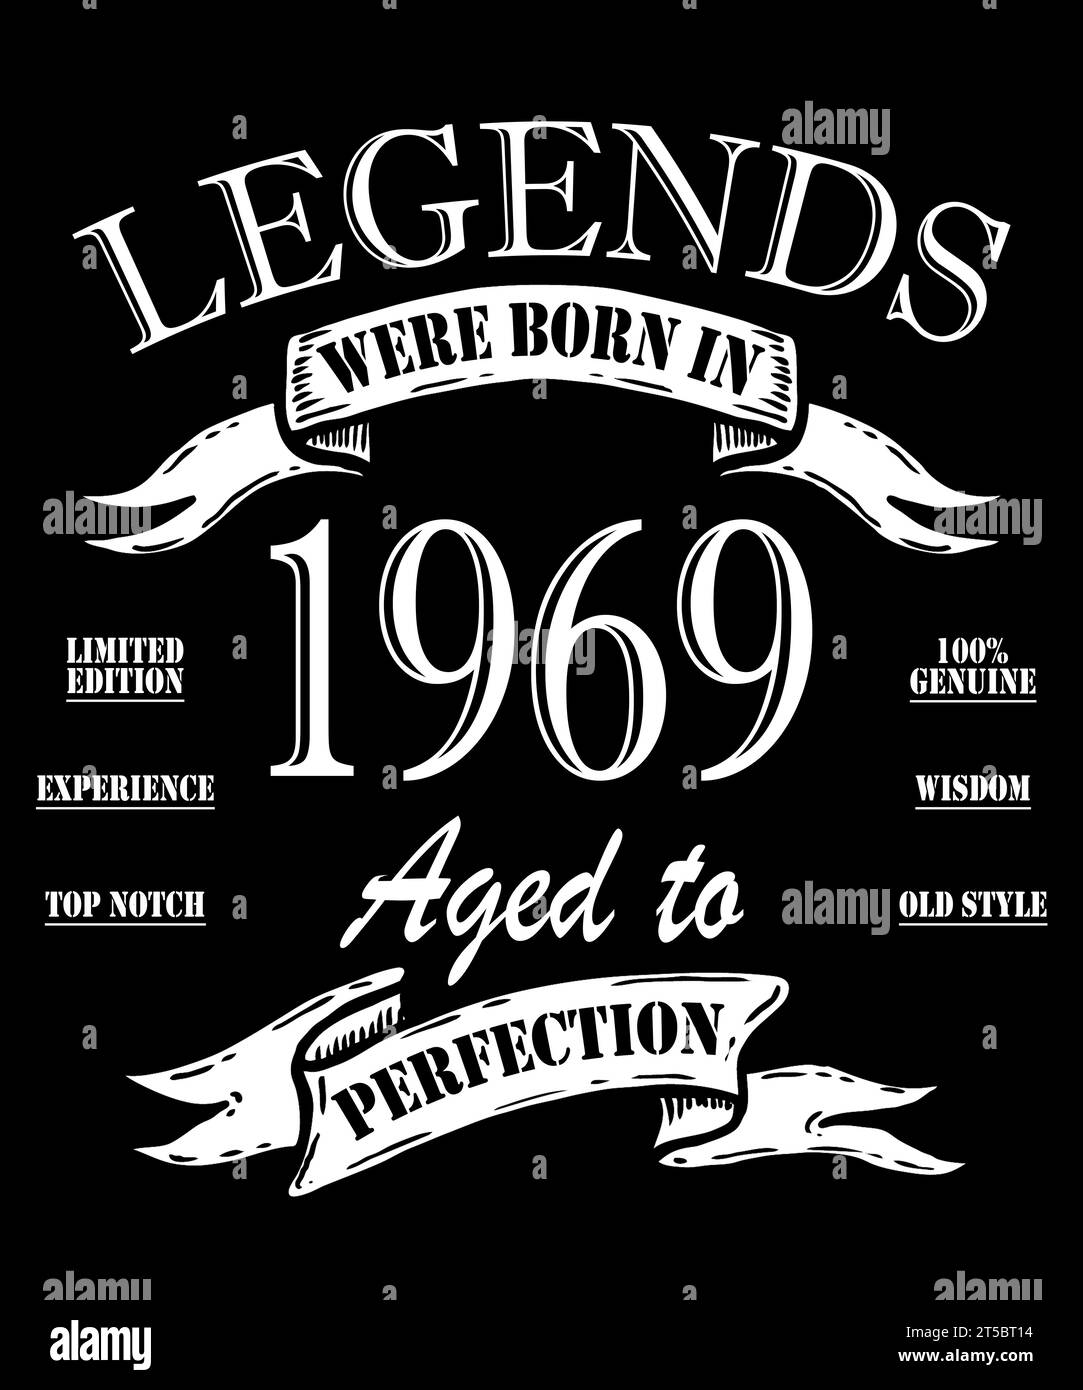 LEGENDS WERE BORN IN QUALITY 1969 GENUINE ONE OF A KIND LIMITED EDITION ...